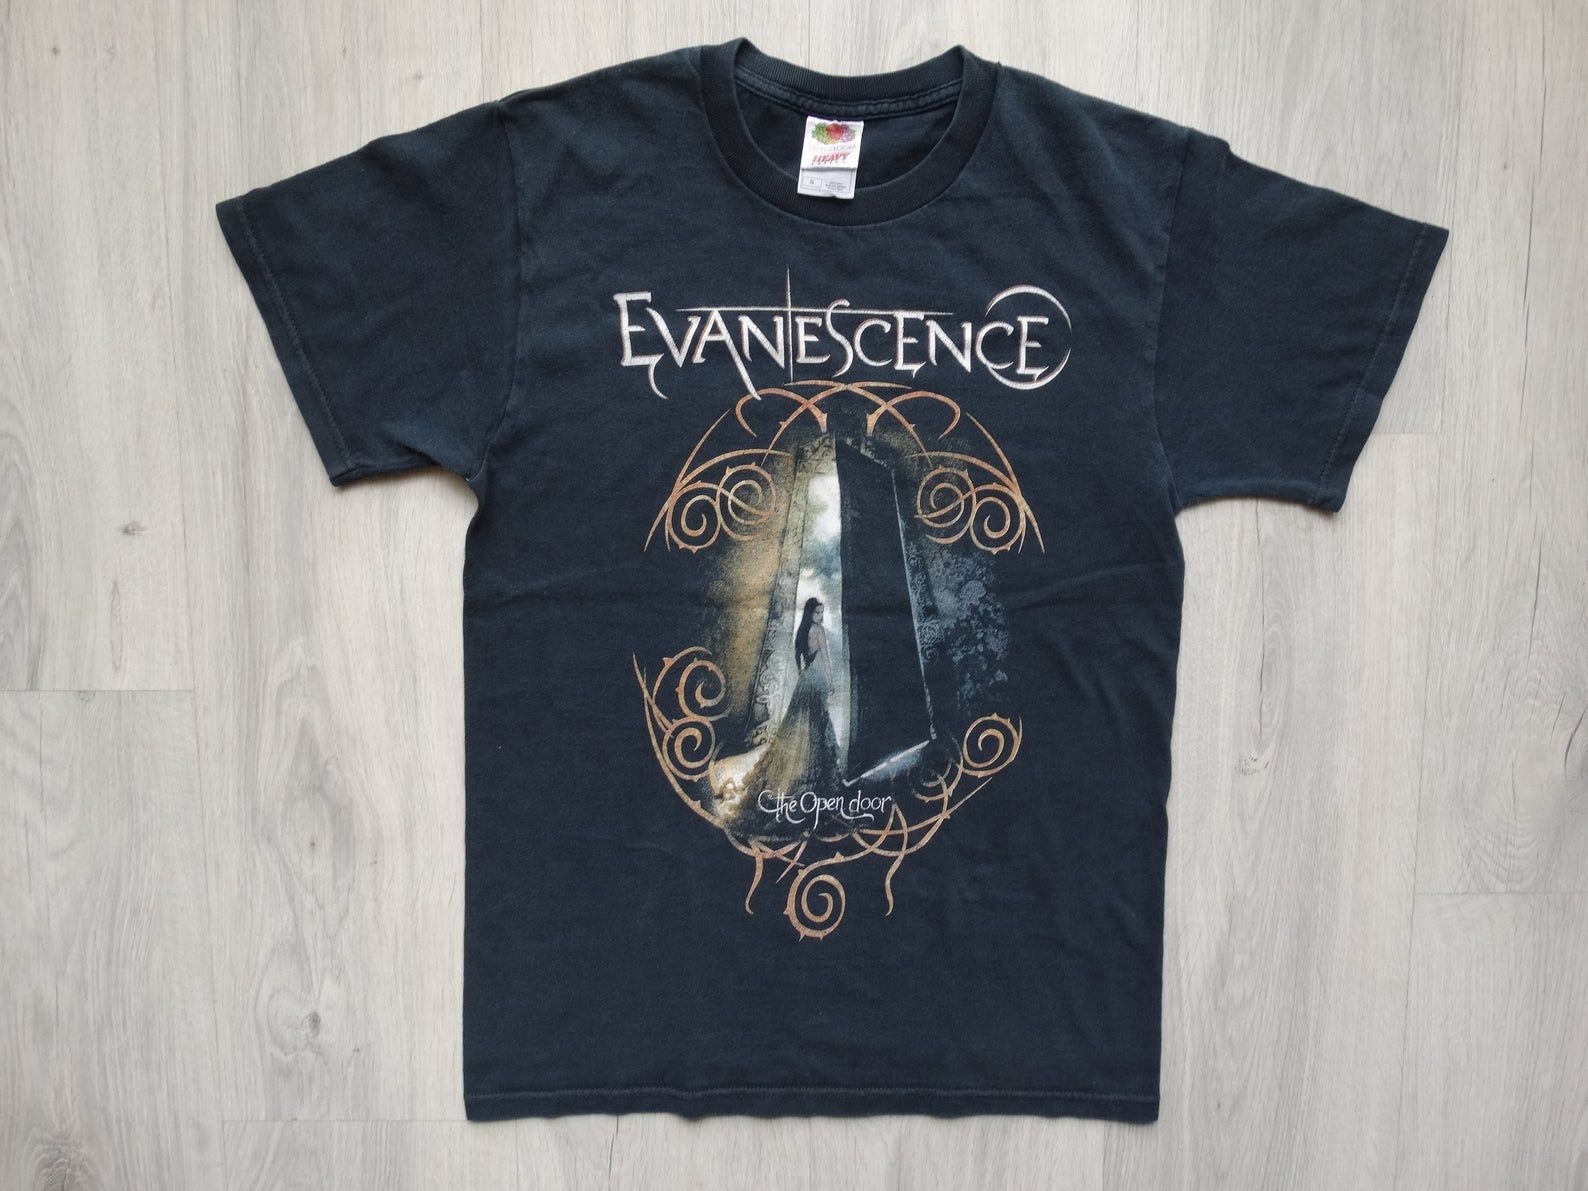 Vintage 2006 Evanescence The Open Door Shirt S Symphonic Metalwithin Temptation Epicaevanescencearch Enemyamorphisgothic Metal